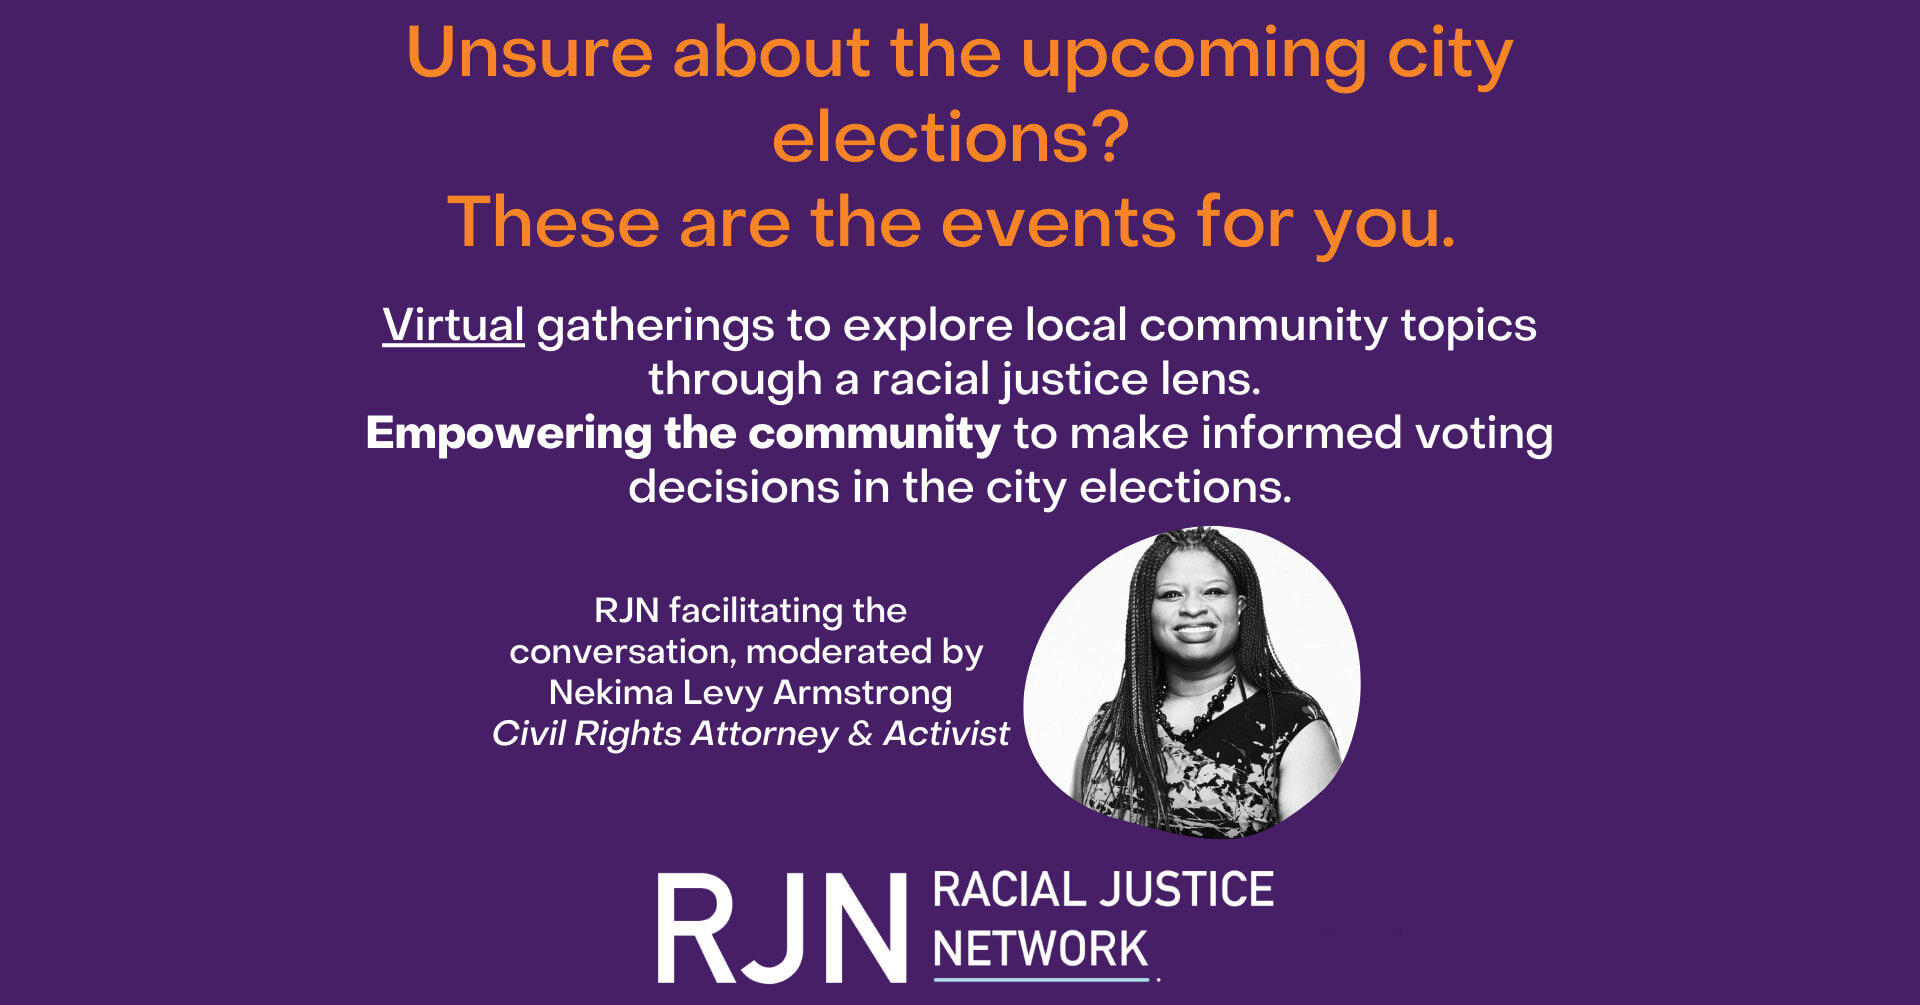 Minneapolis Mayoral Forum | Racial Justice Topics - The Racial Justice Network will moderate a virtual Minneapolis Mayoral forum. The focus will be racial justice topics.